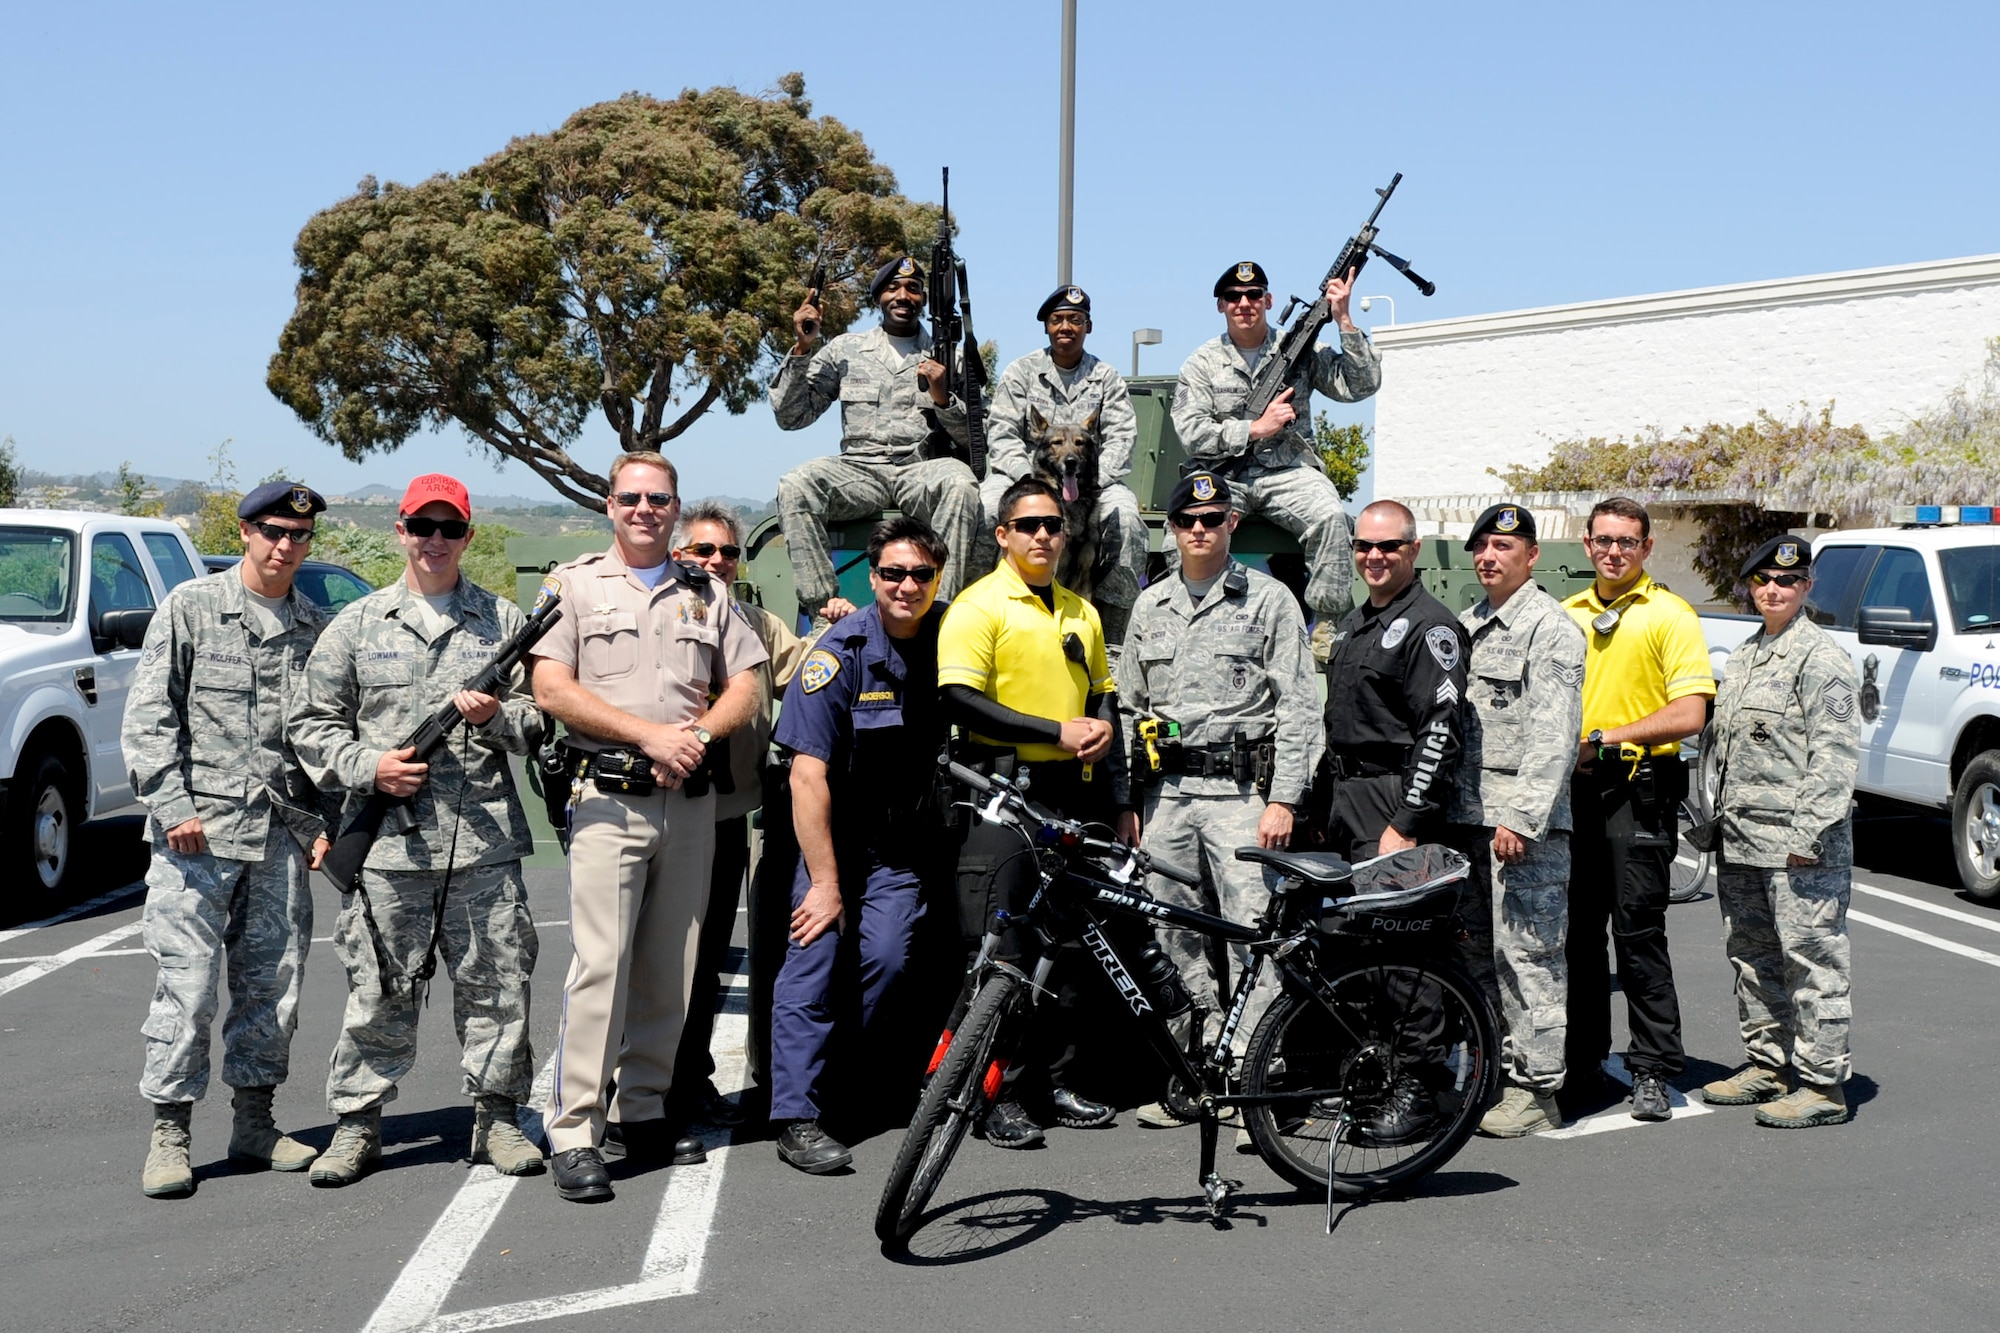 VANDENBERG AIR FORCE BASE, Calif. -- 30th Security Forces Squadron members and local law enforcment official pose for a group photo during a police display event at the Albertsons parking lot in Lompoc, Wednesday, May 16th, 2012. The display was held in conjunction with National Police Week, an annual celebration that recognizes the service and sacrifice of U.S. law enforcement personnel. (U.S. Air Force photo/Staff Sgt. Levi Riendeau)